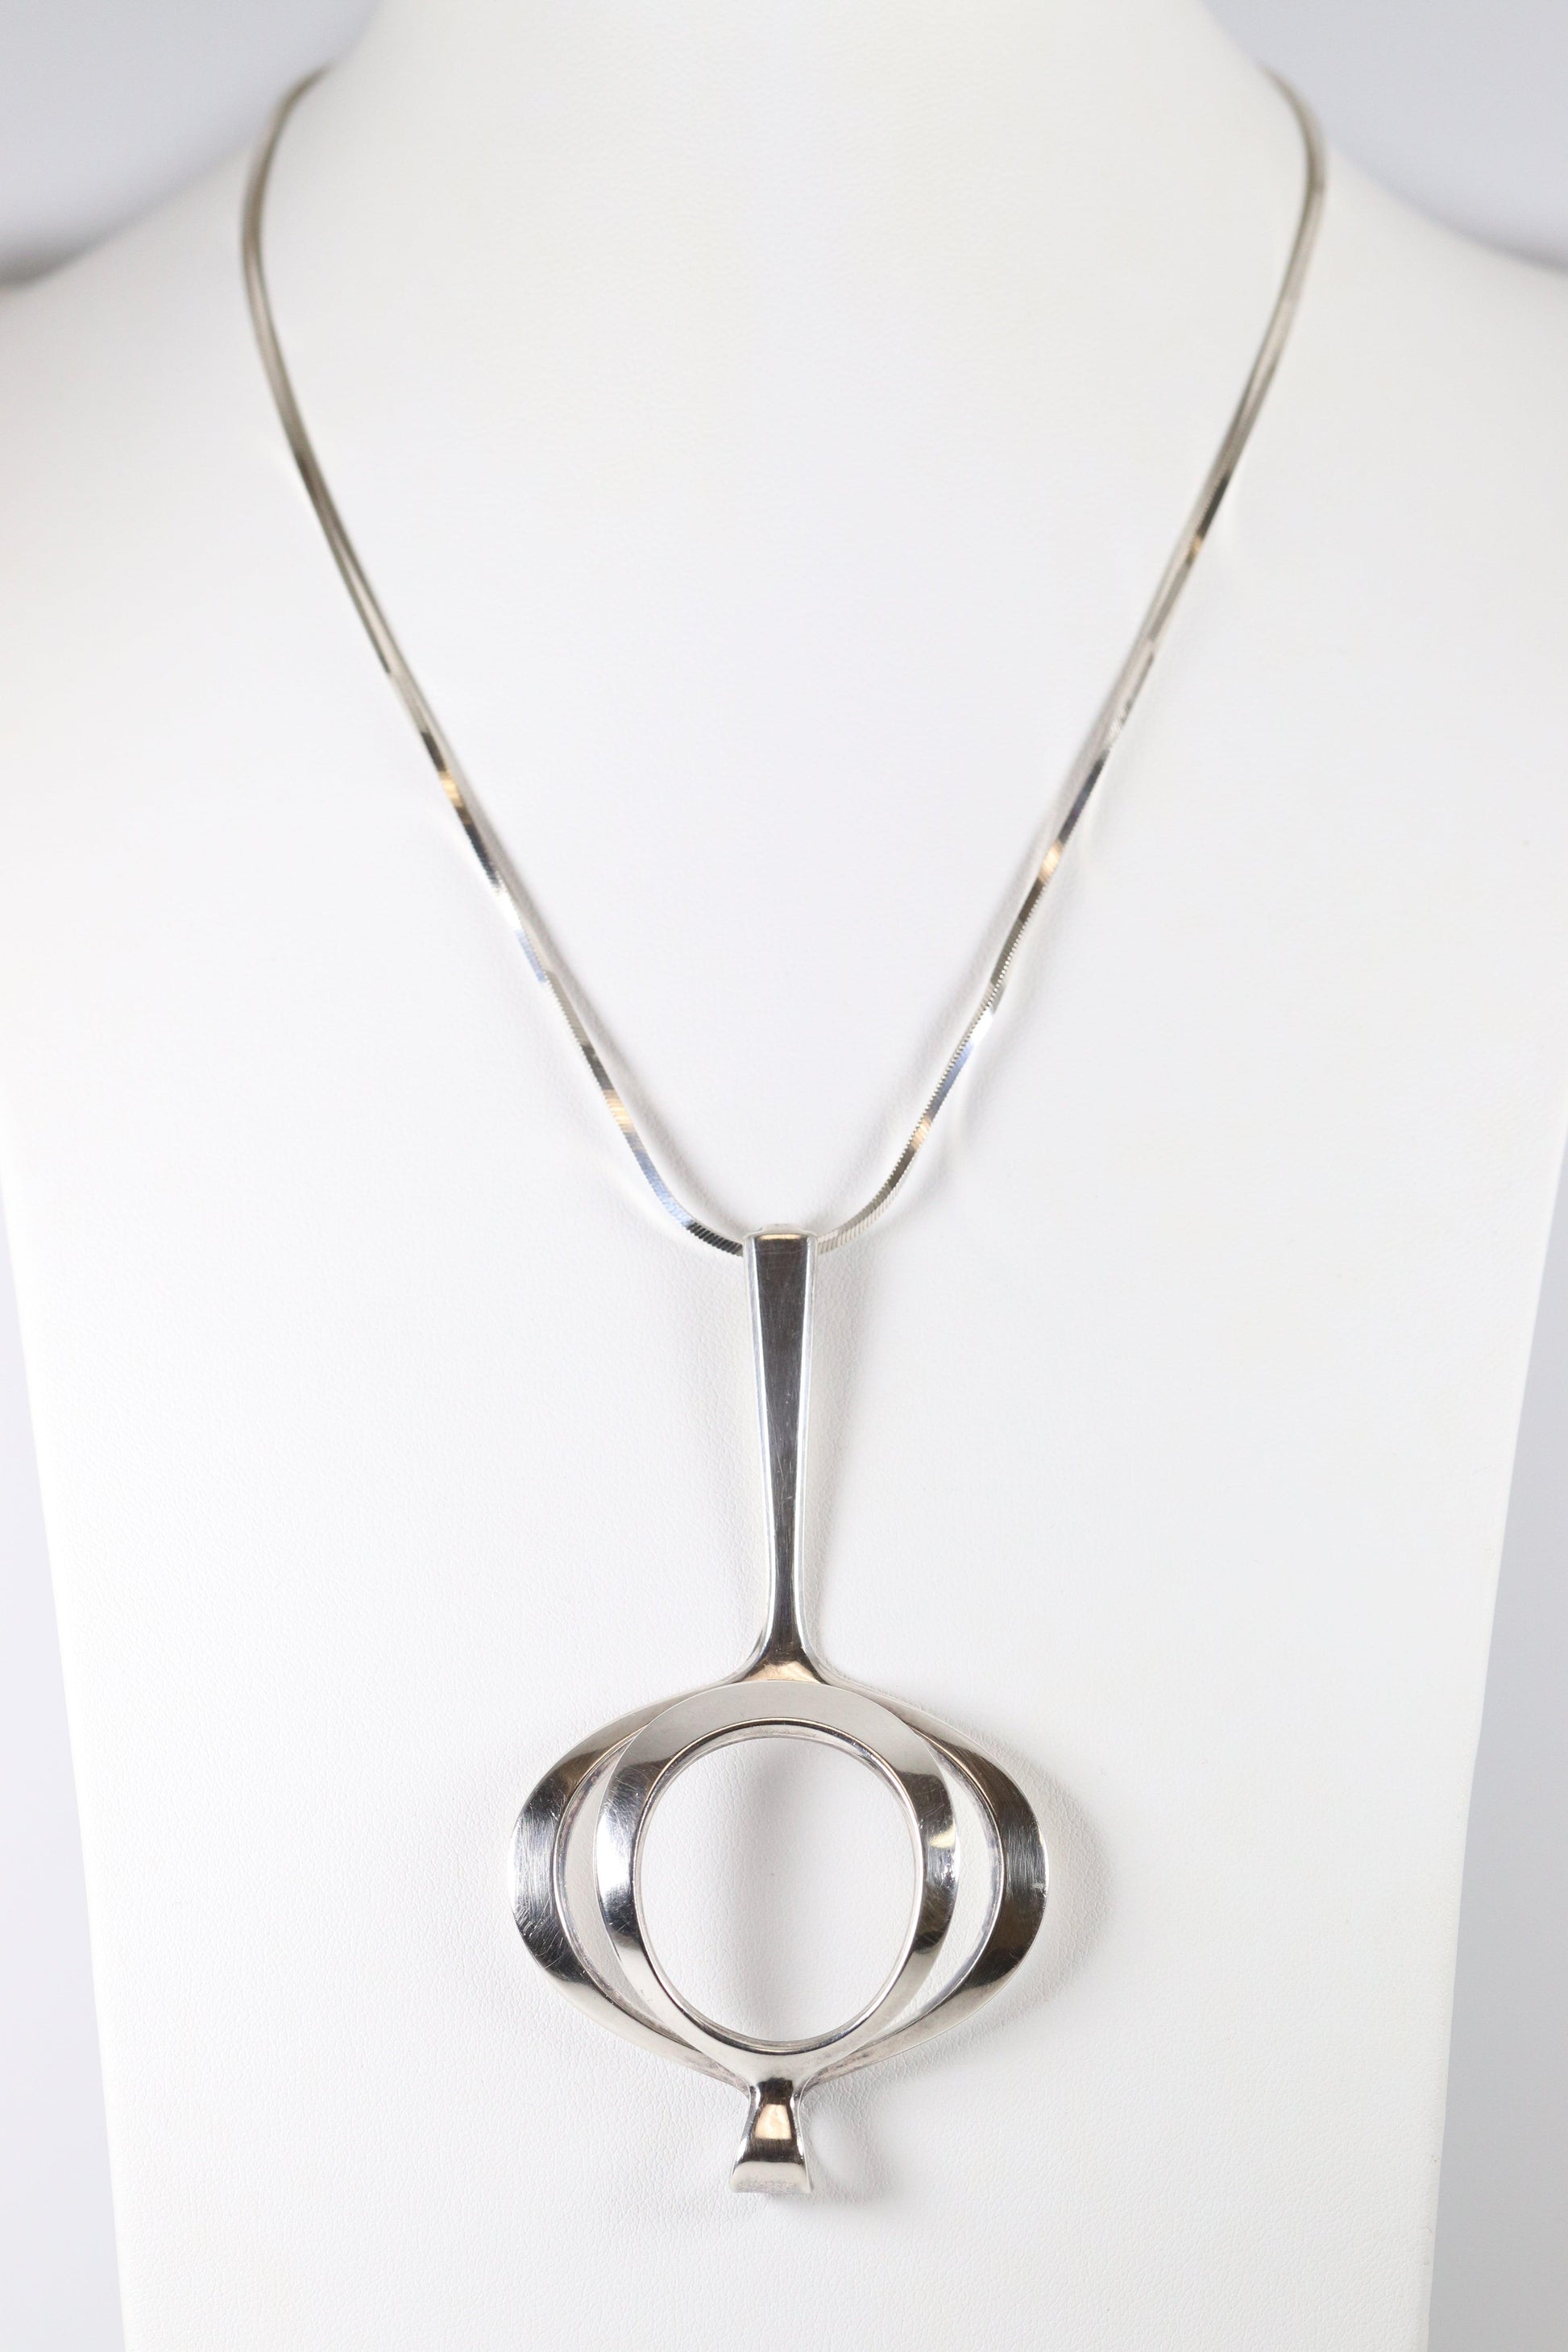 Vintage Modernist Silver Jewelry | David Andersen Modernist Abstract Silver Pendant Necklace - Carmel Fine Silver Jewelry